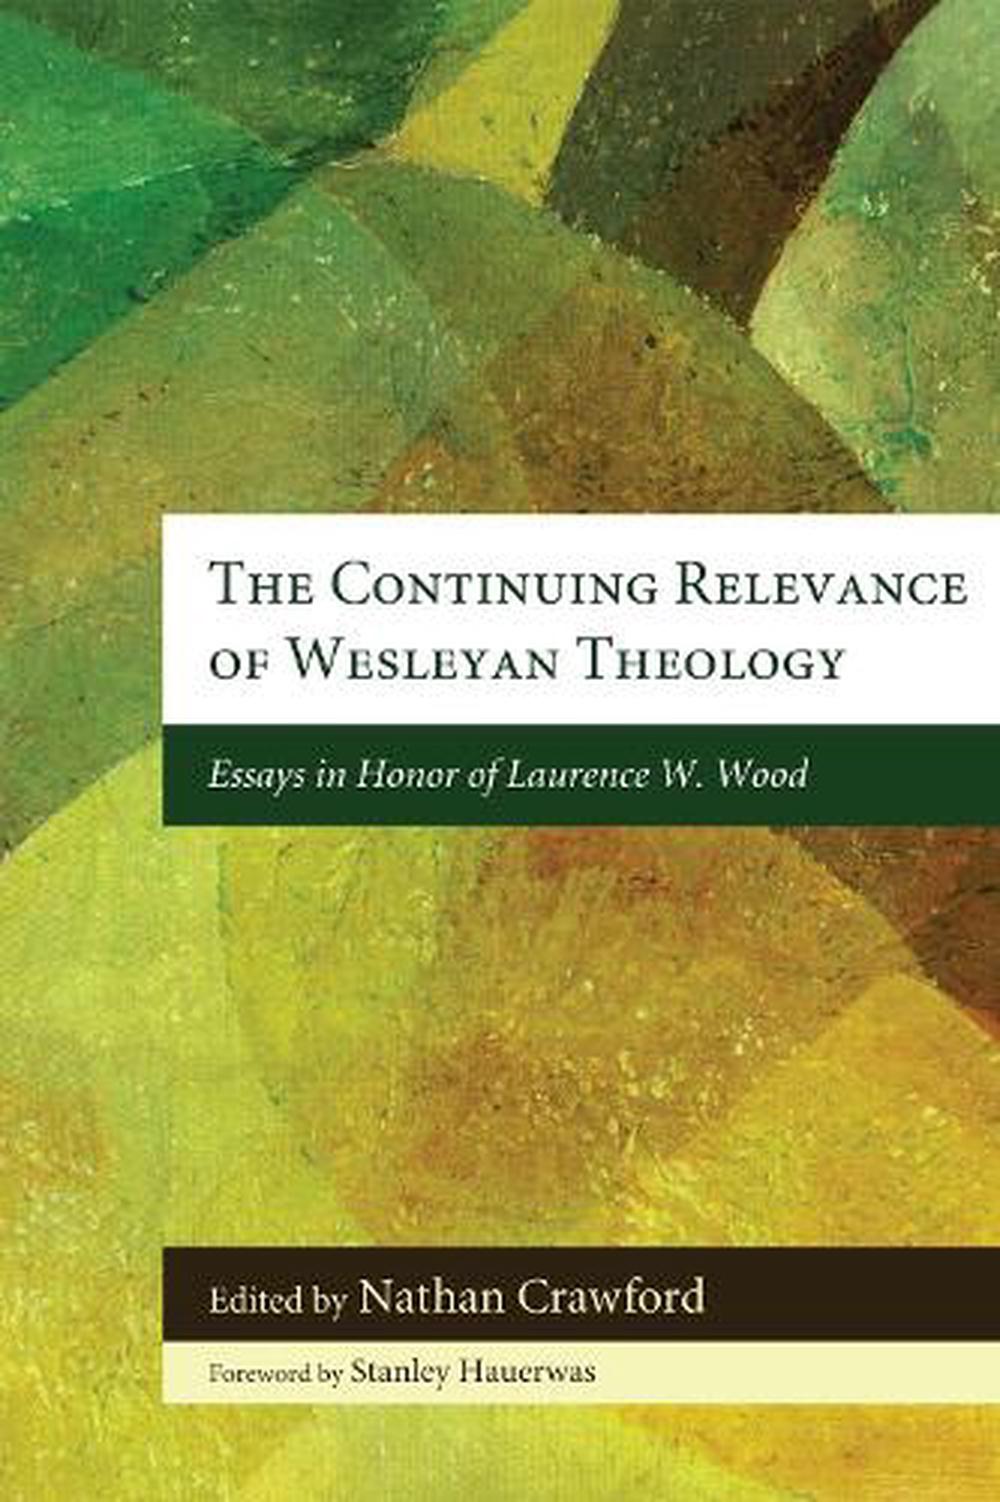 The Continuing Relevance of Wesleyan Theology Essays in Honor of